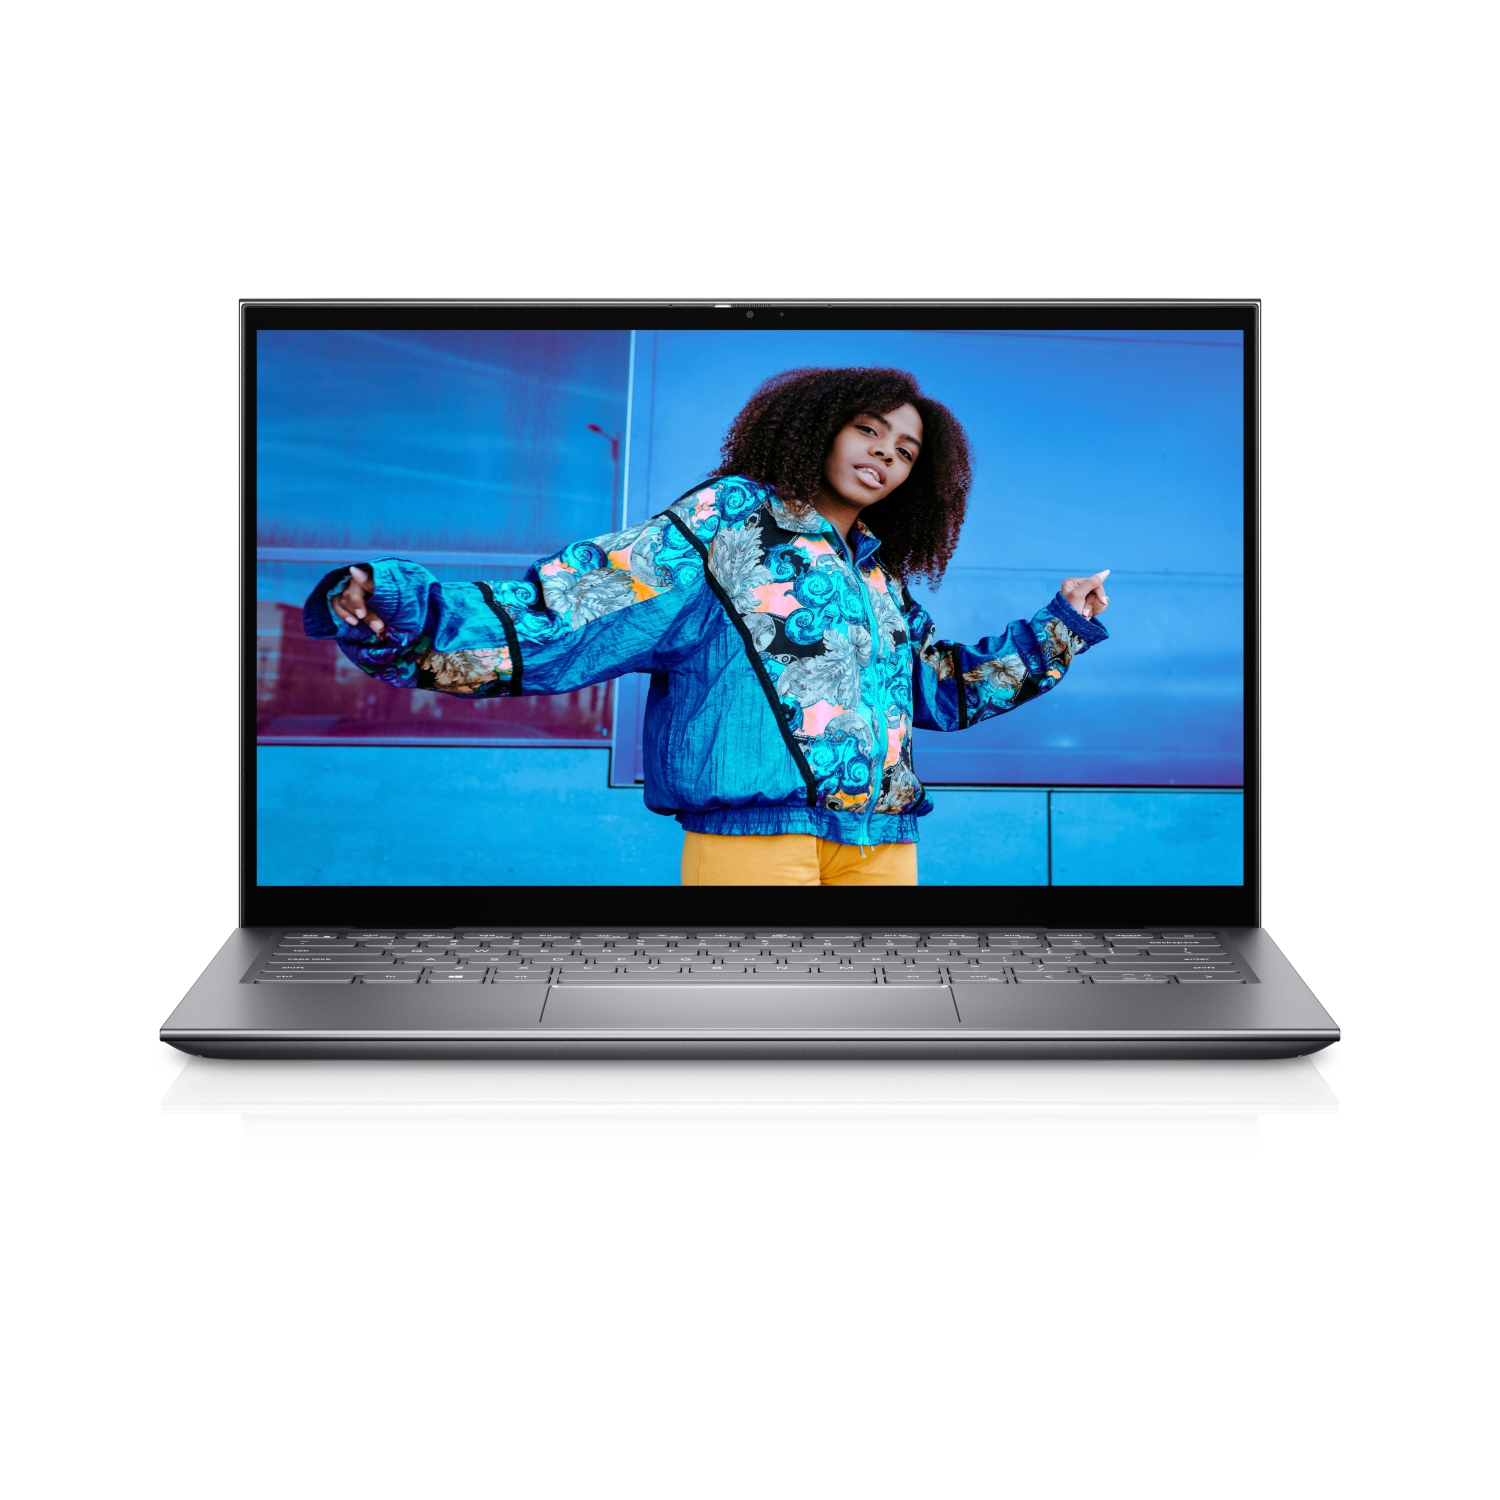 Refurbished (Excellent) – Dell Inspiron 5410 2-in-1 (2021) | 14" FHD Touch | Core i5 - 4TB SSD - 32GB RAM | 4 Cores @ 4.2 GHz - 11th Gen CPU